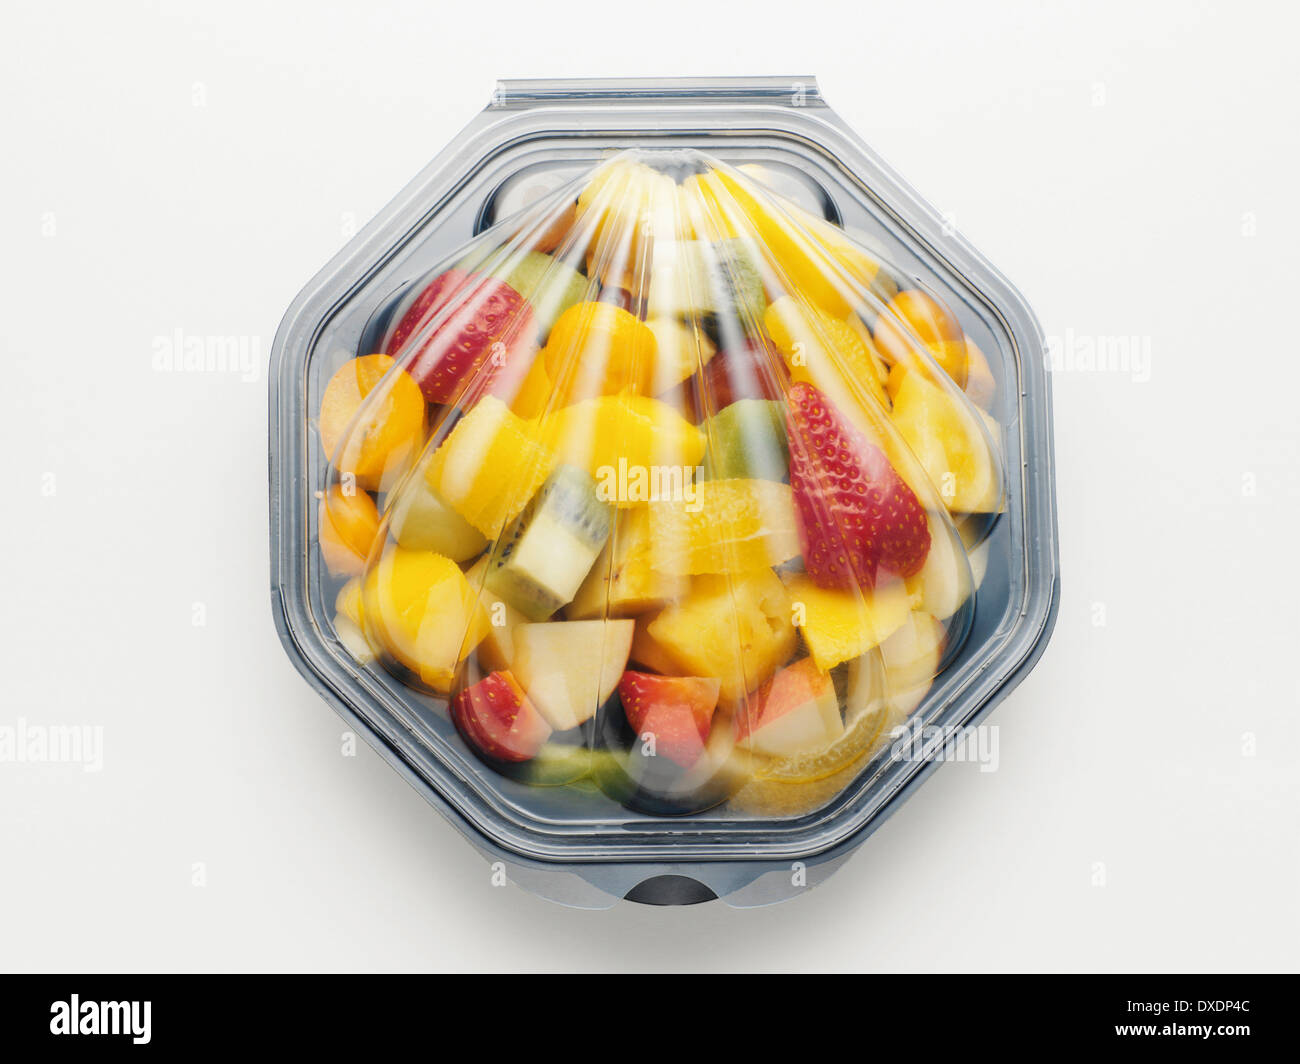 Fruit And Vegetable Salad Box Stock Photo, Picture and Royalty Free Image.  Image 47259453.